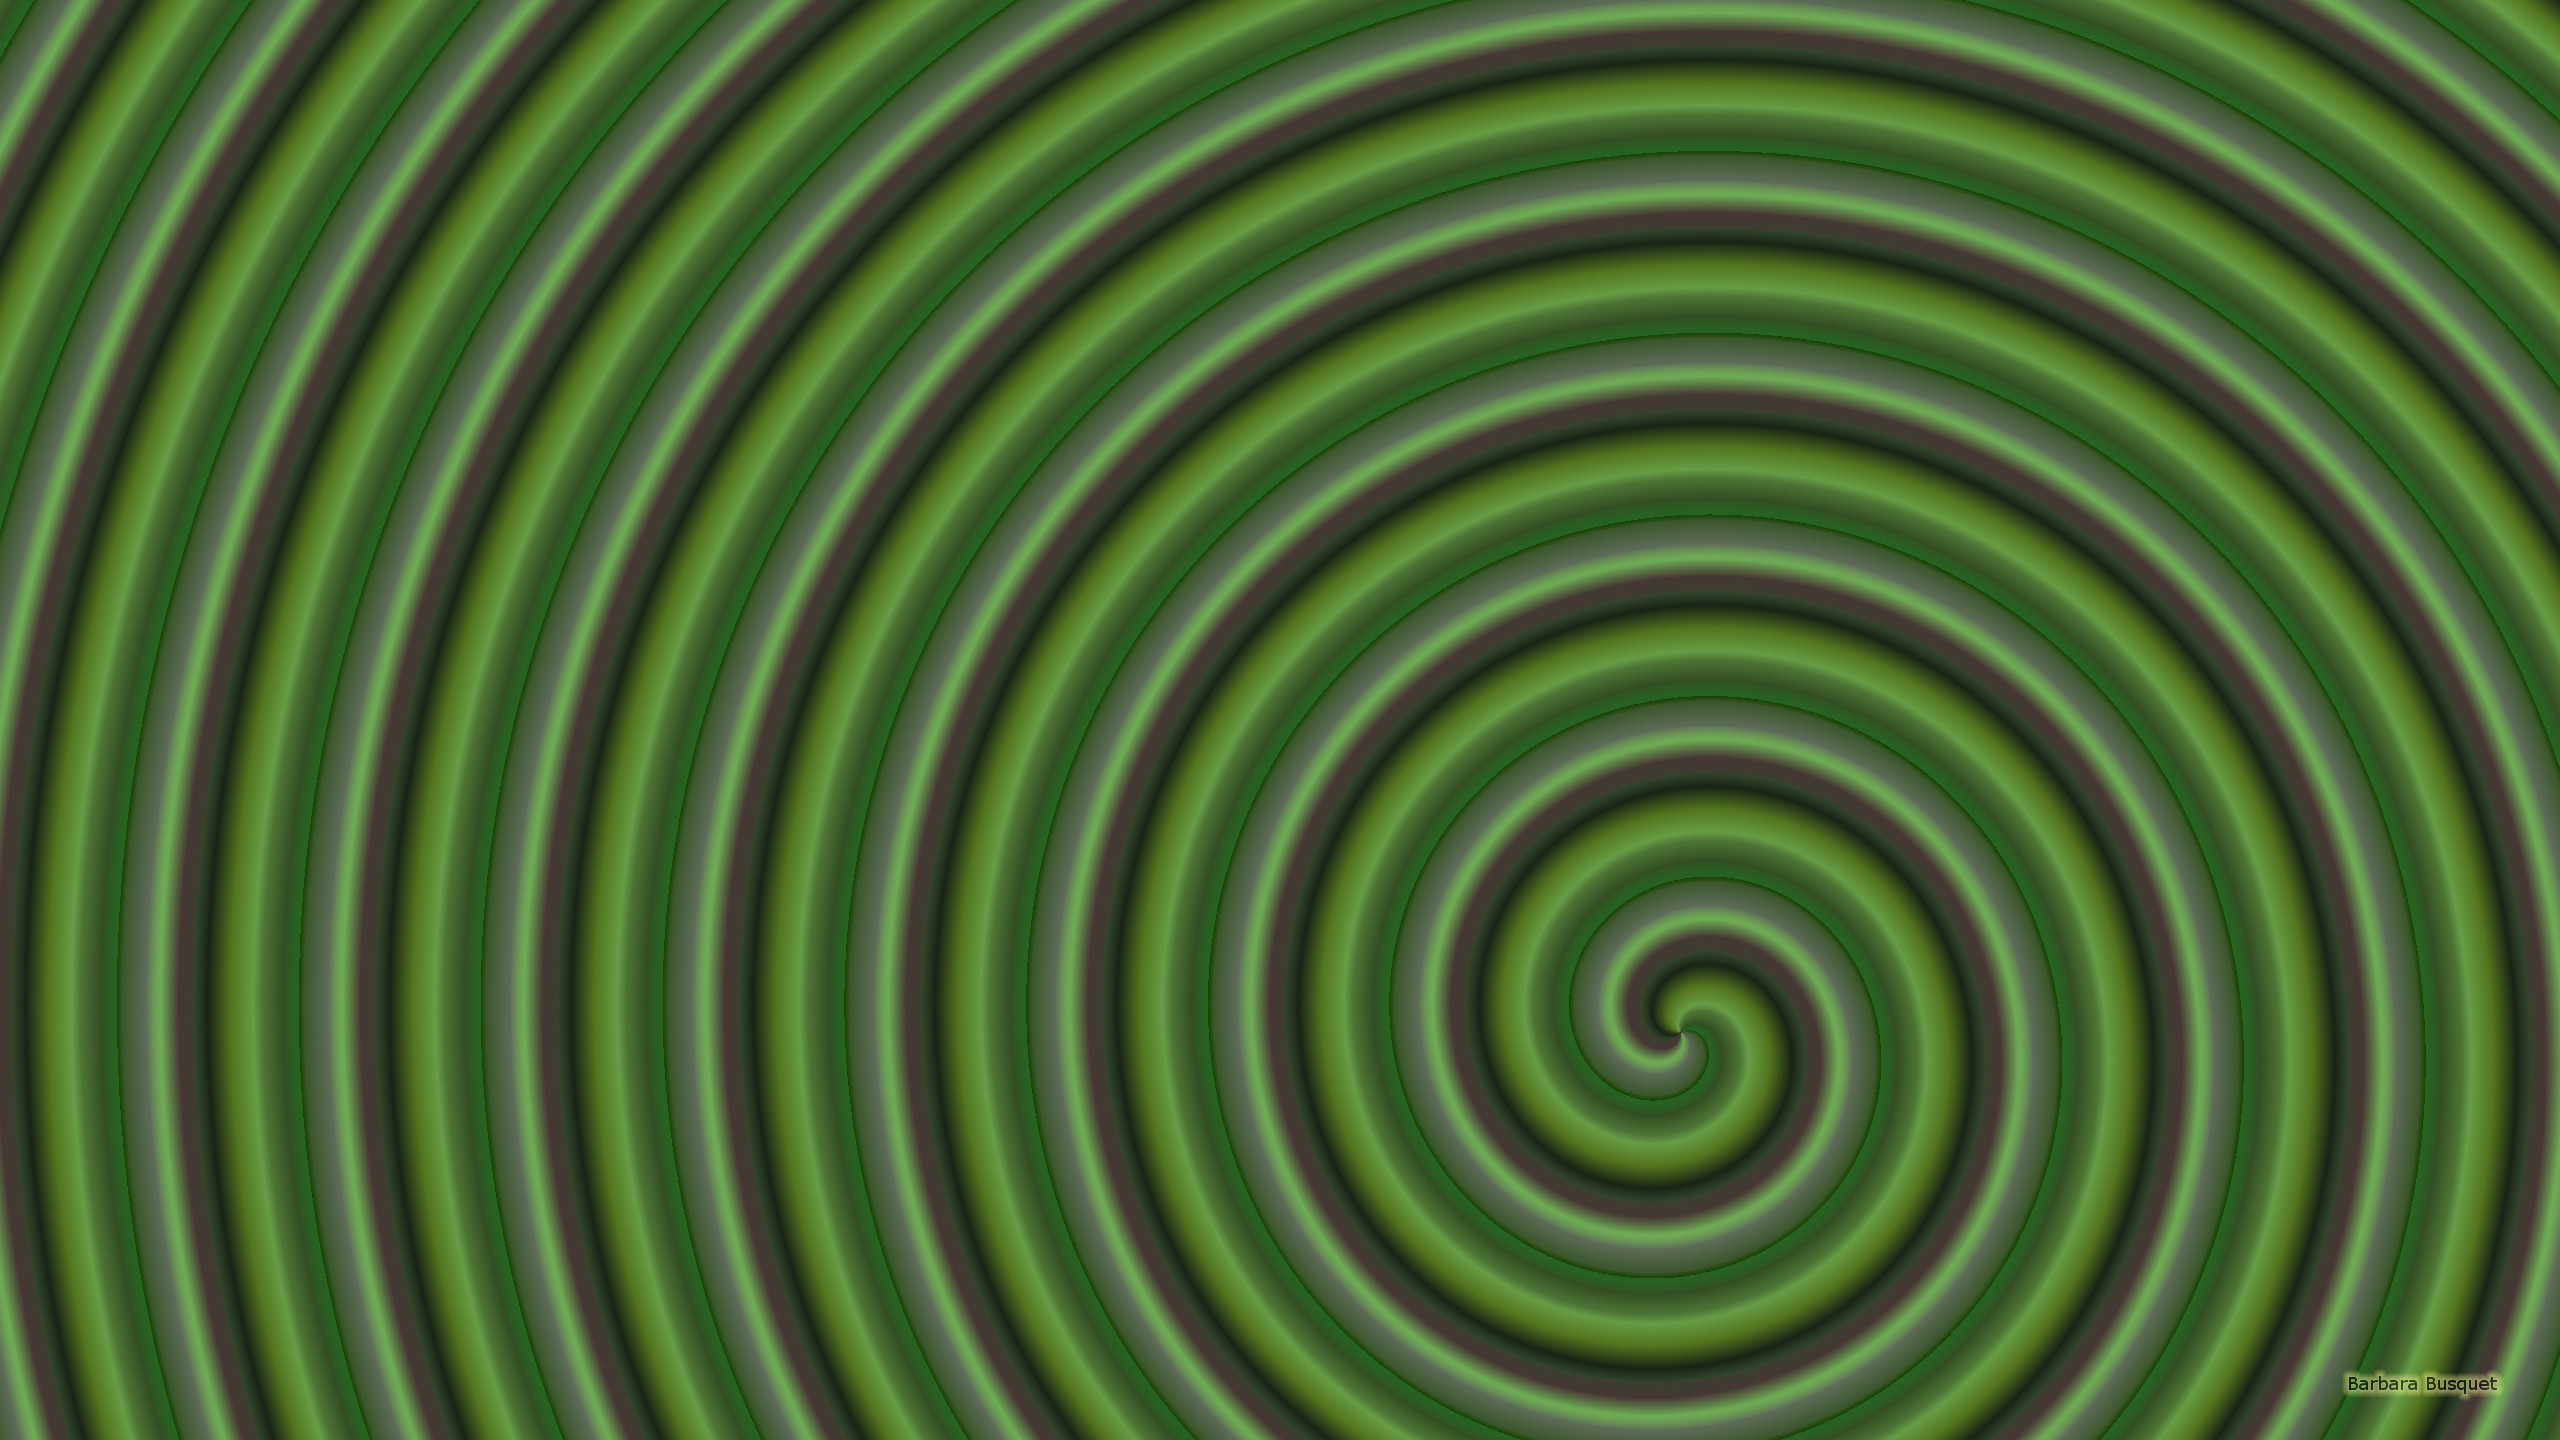 2560x1440 Spiral pattern wallpaper in the color green.